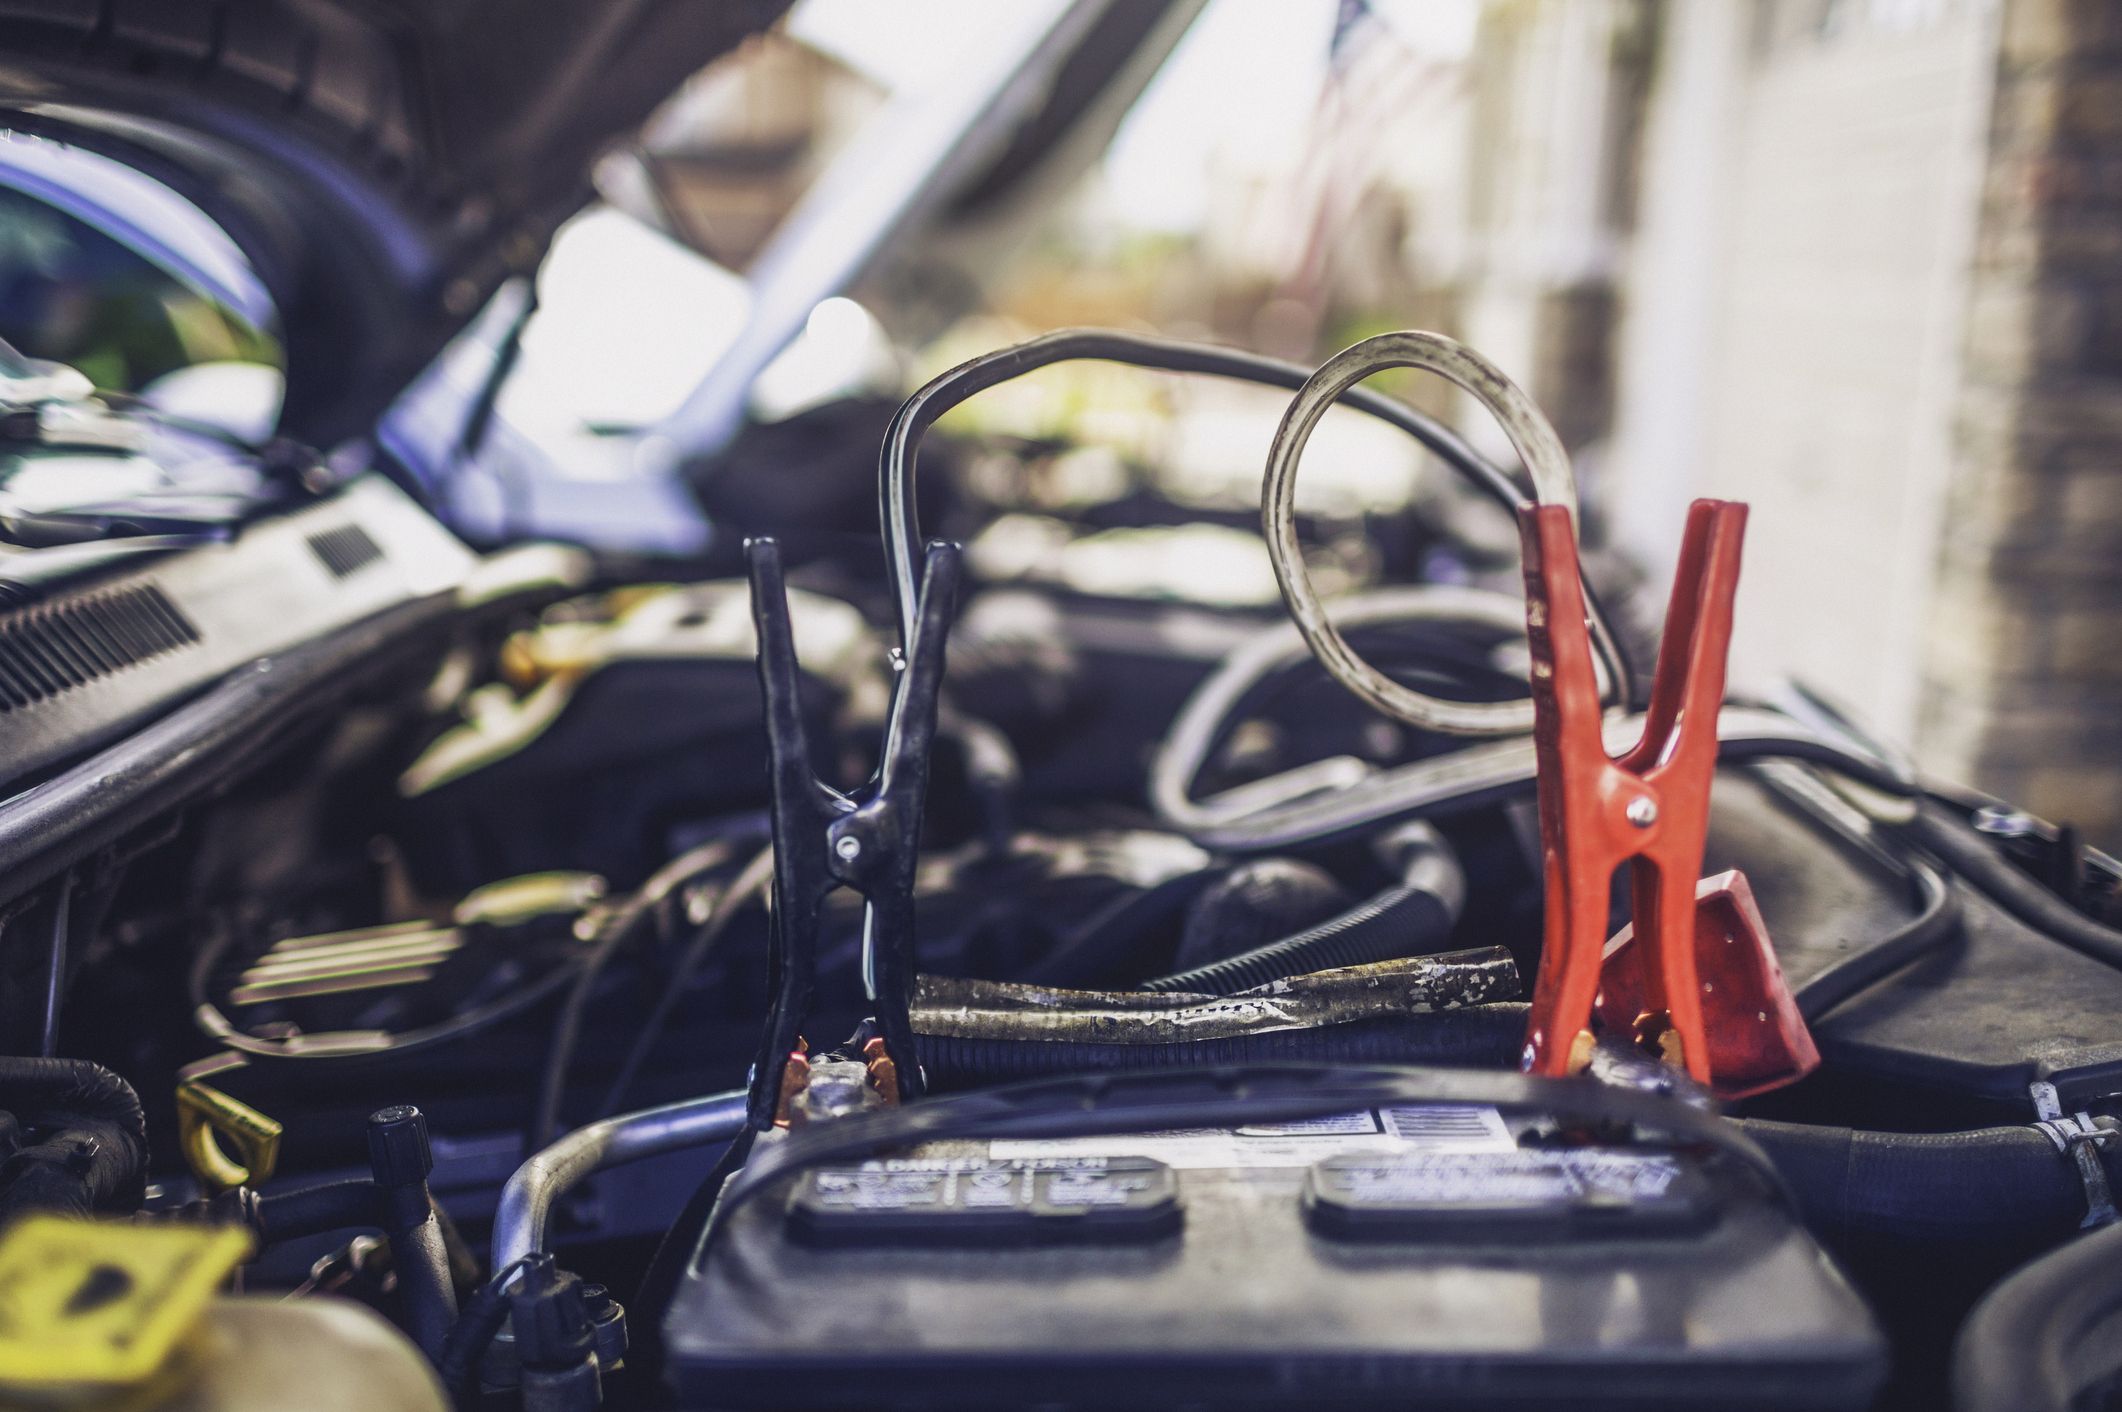 How to Jump Start a Car - Step-By-Step Guide to Using Jumper Cables